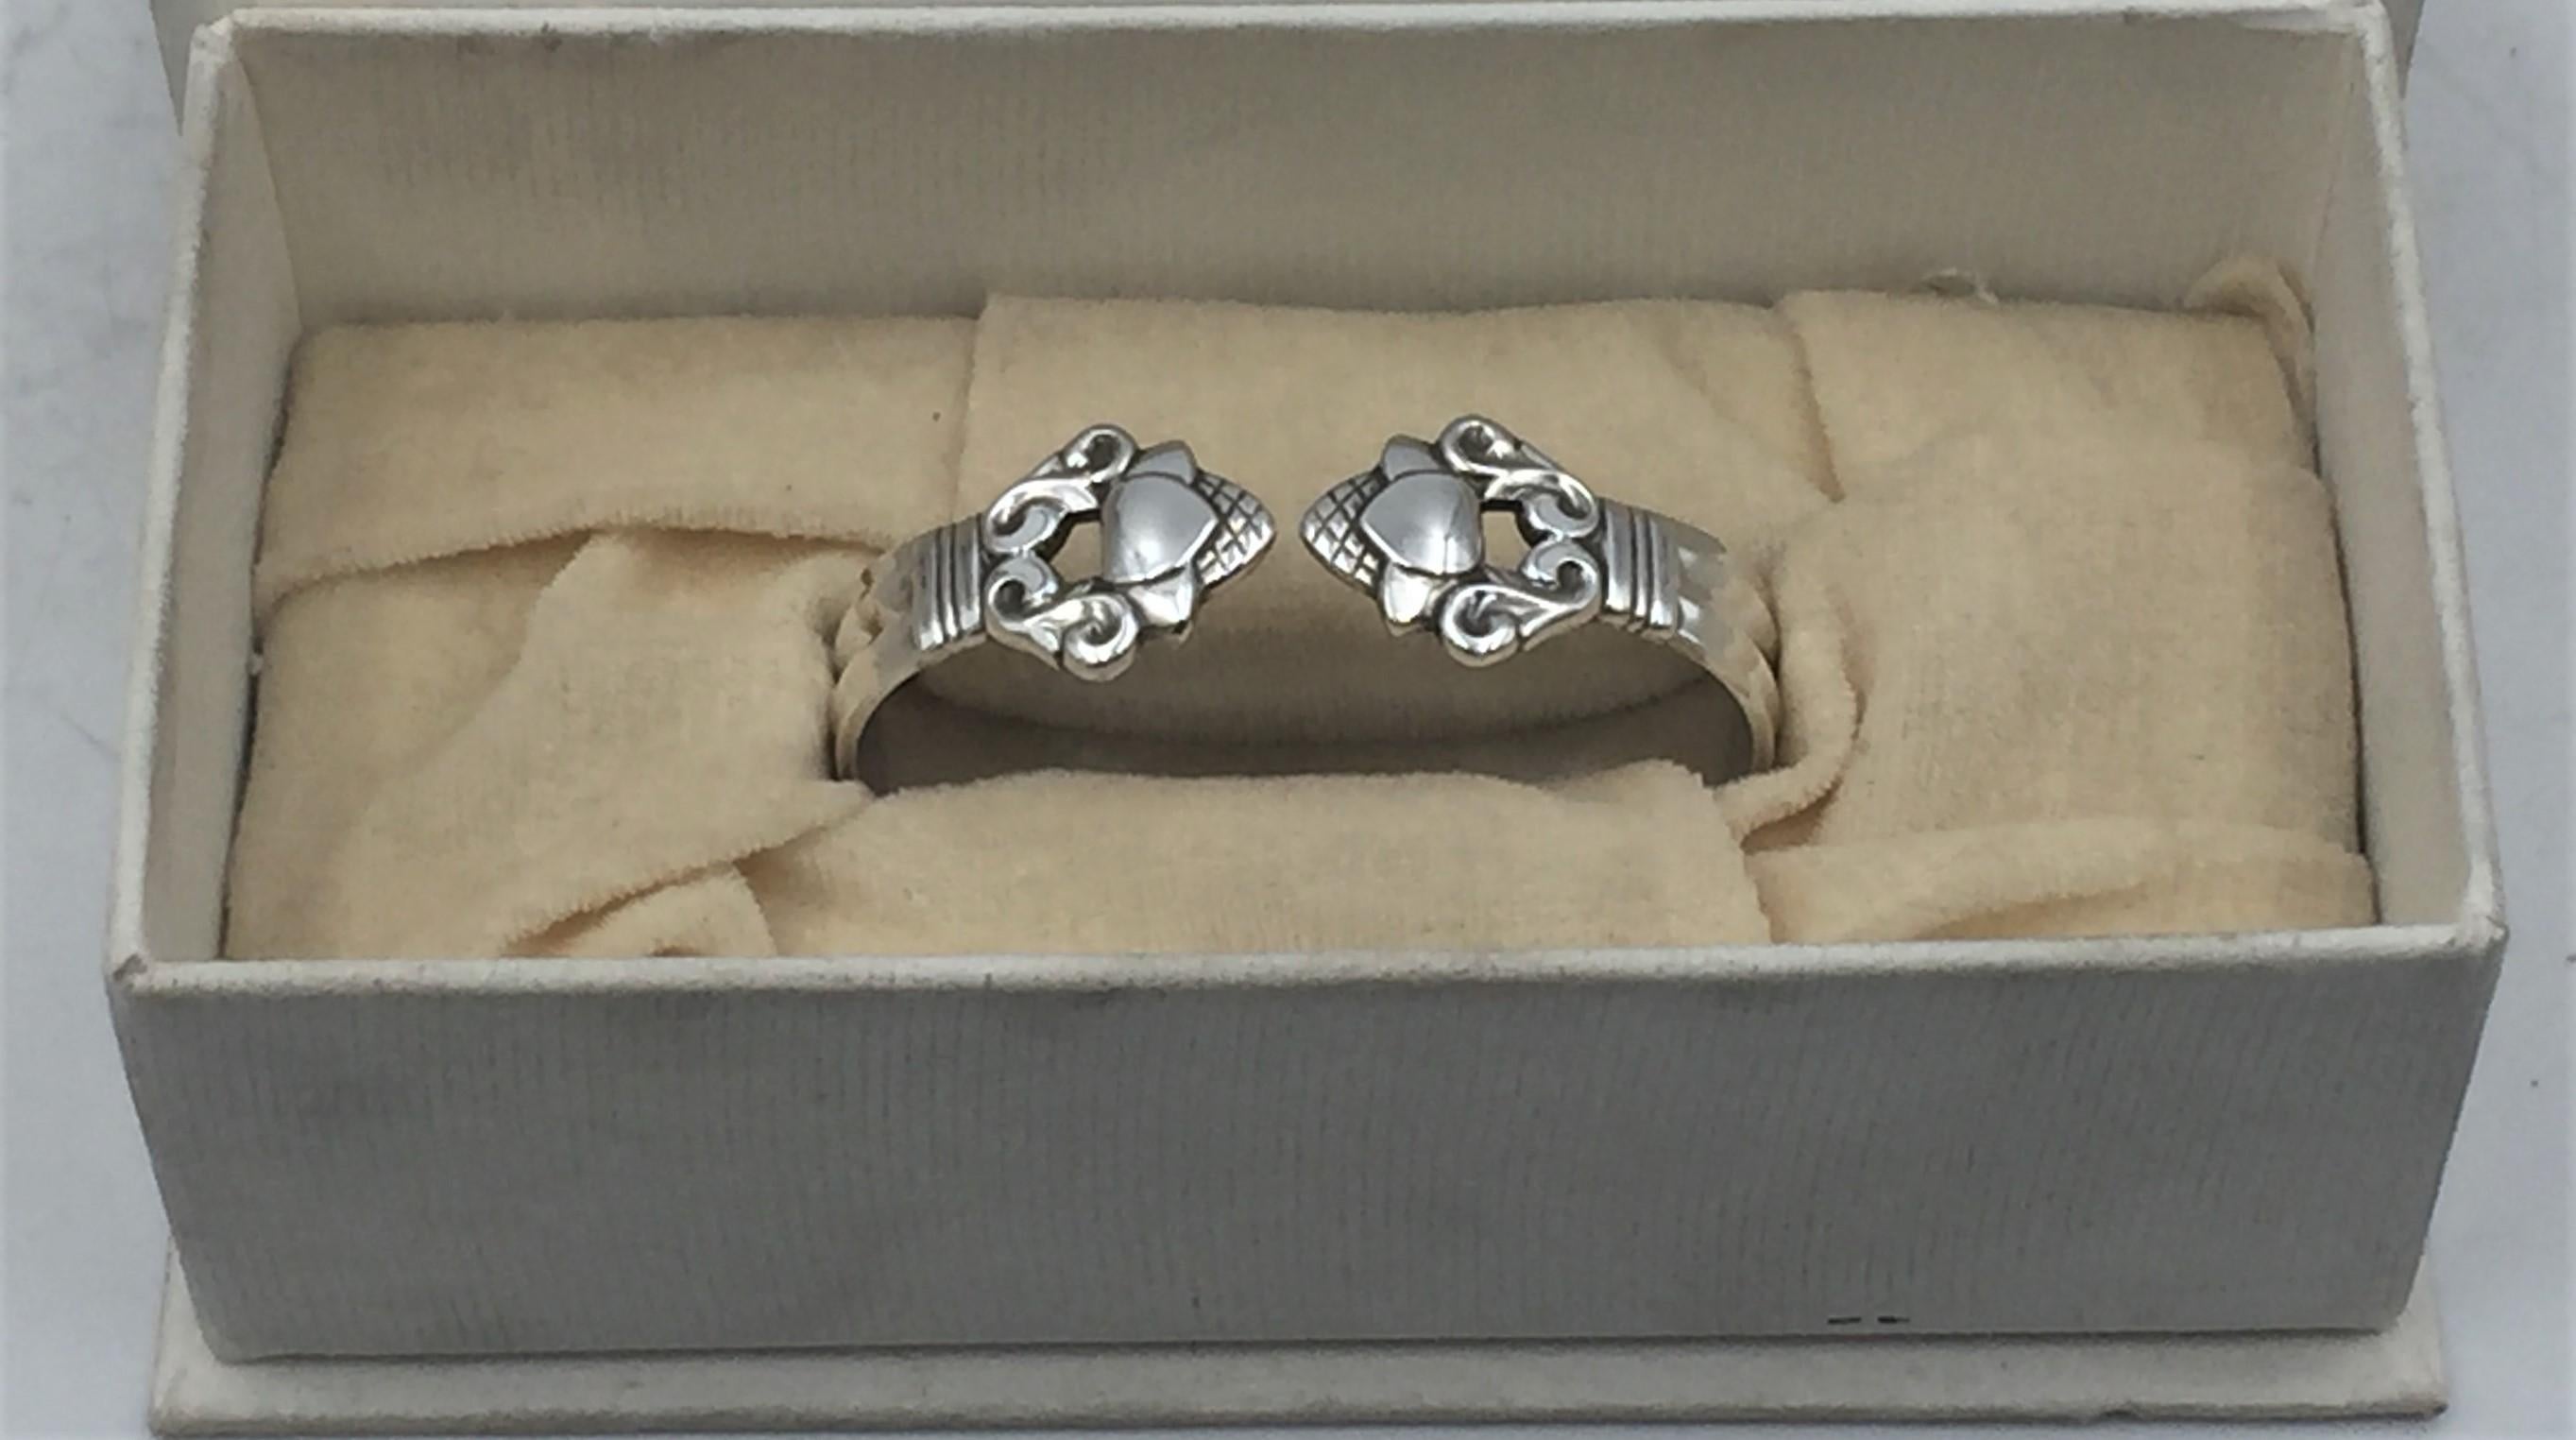 An elegant sterling silver napkin ring holder by the Danish maker Georg Jensen in his fabulous Acorn pattern which was designed by Johan Rohde. Comes in fitted original Georg Jensen box. Measuring approximately 2'' in length by 1 1/4'' in width.